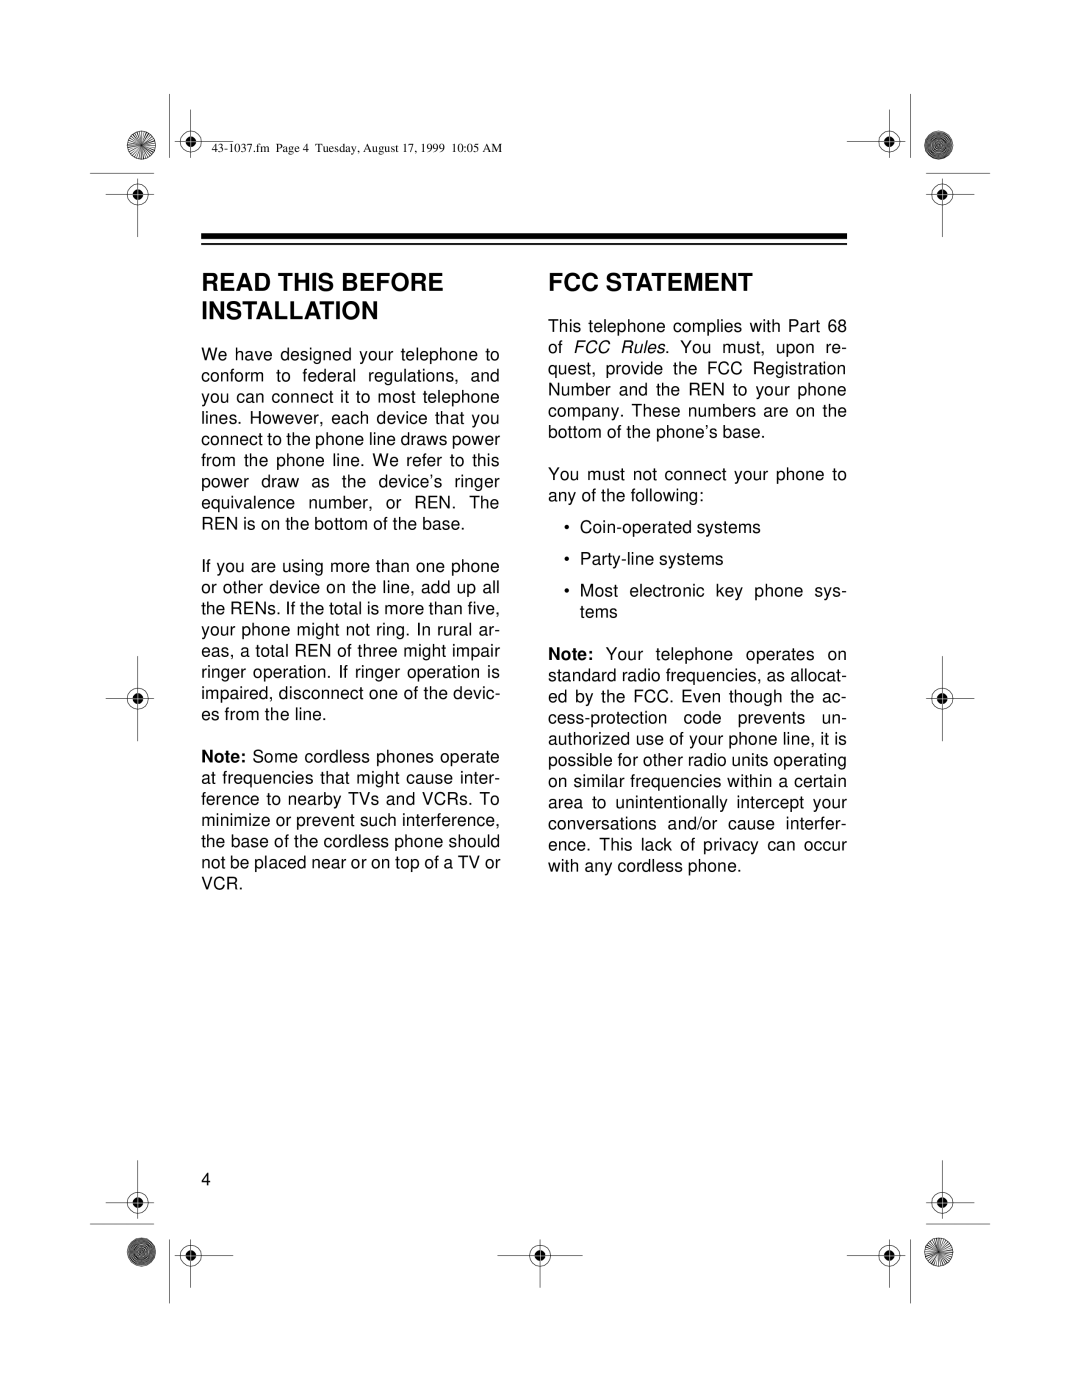 Radio Shack ET-537 owner manual Read this Before Installation, FCC Statement 